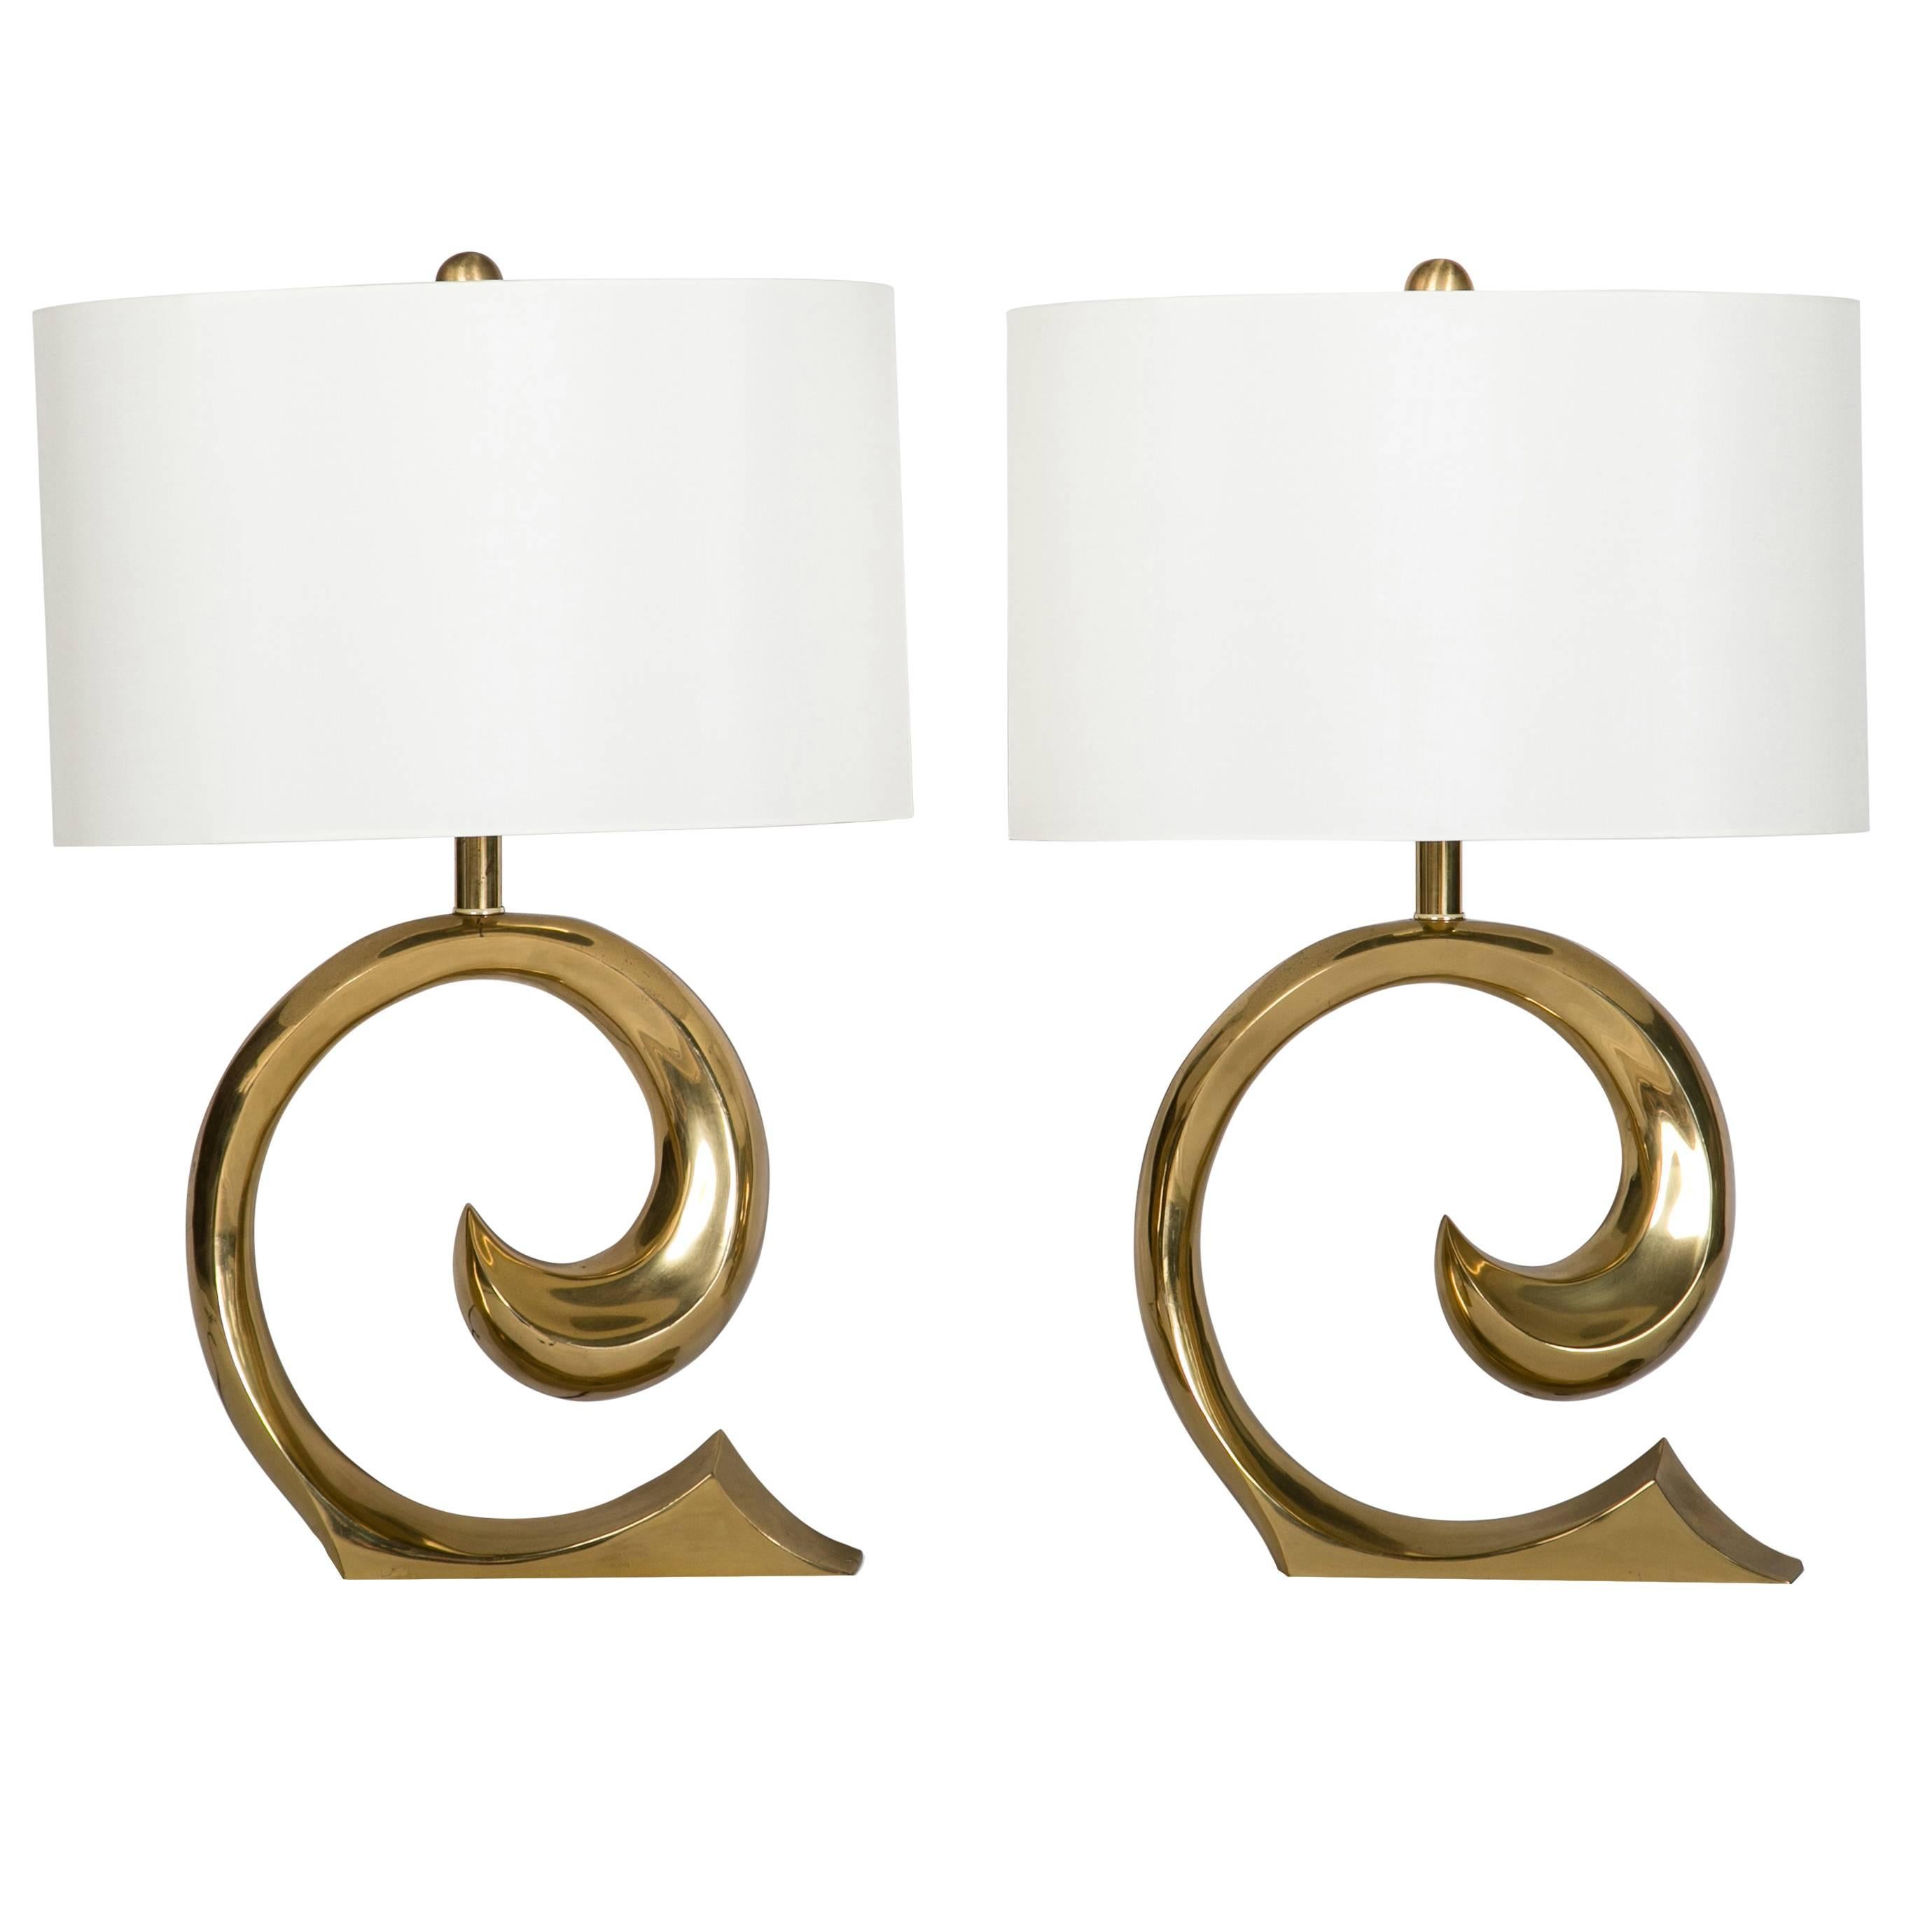 Pair of Signature Lamps by Pierre Cardin